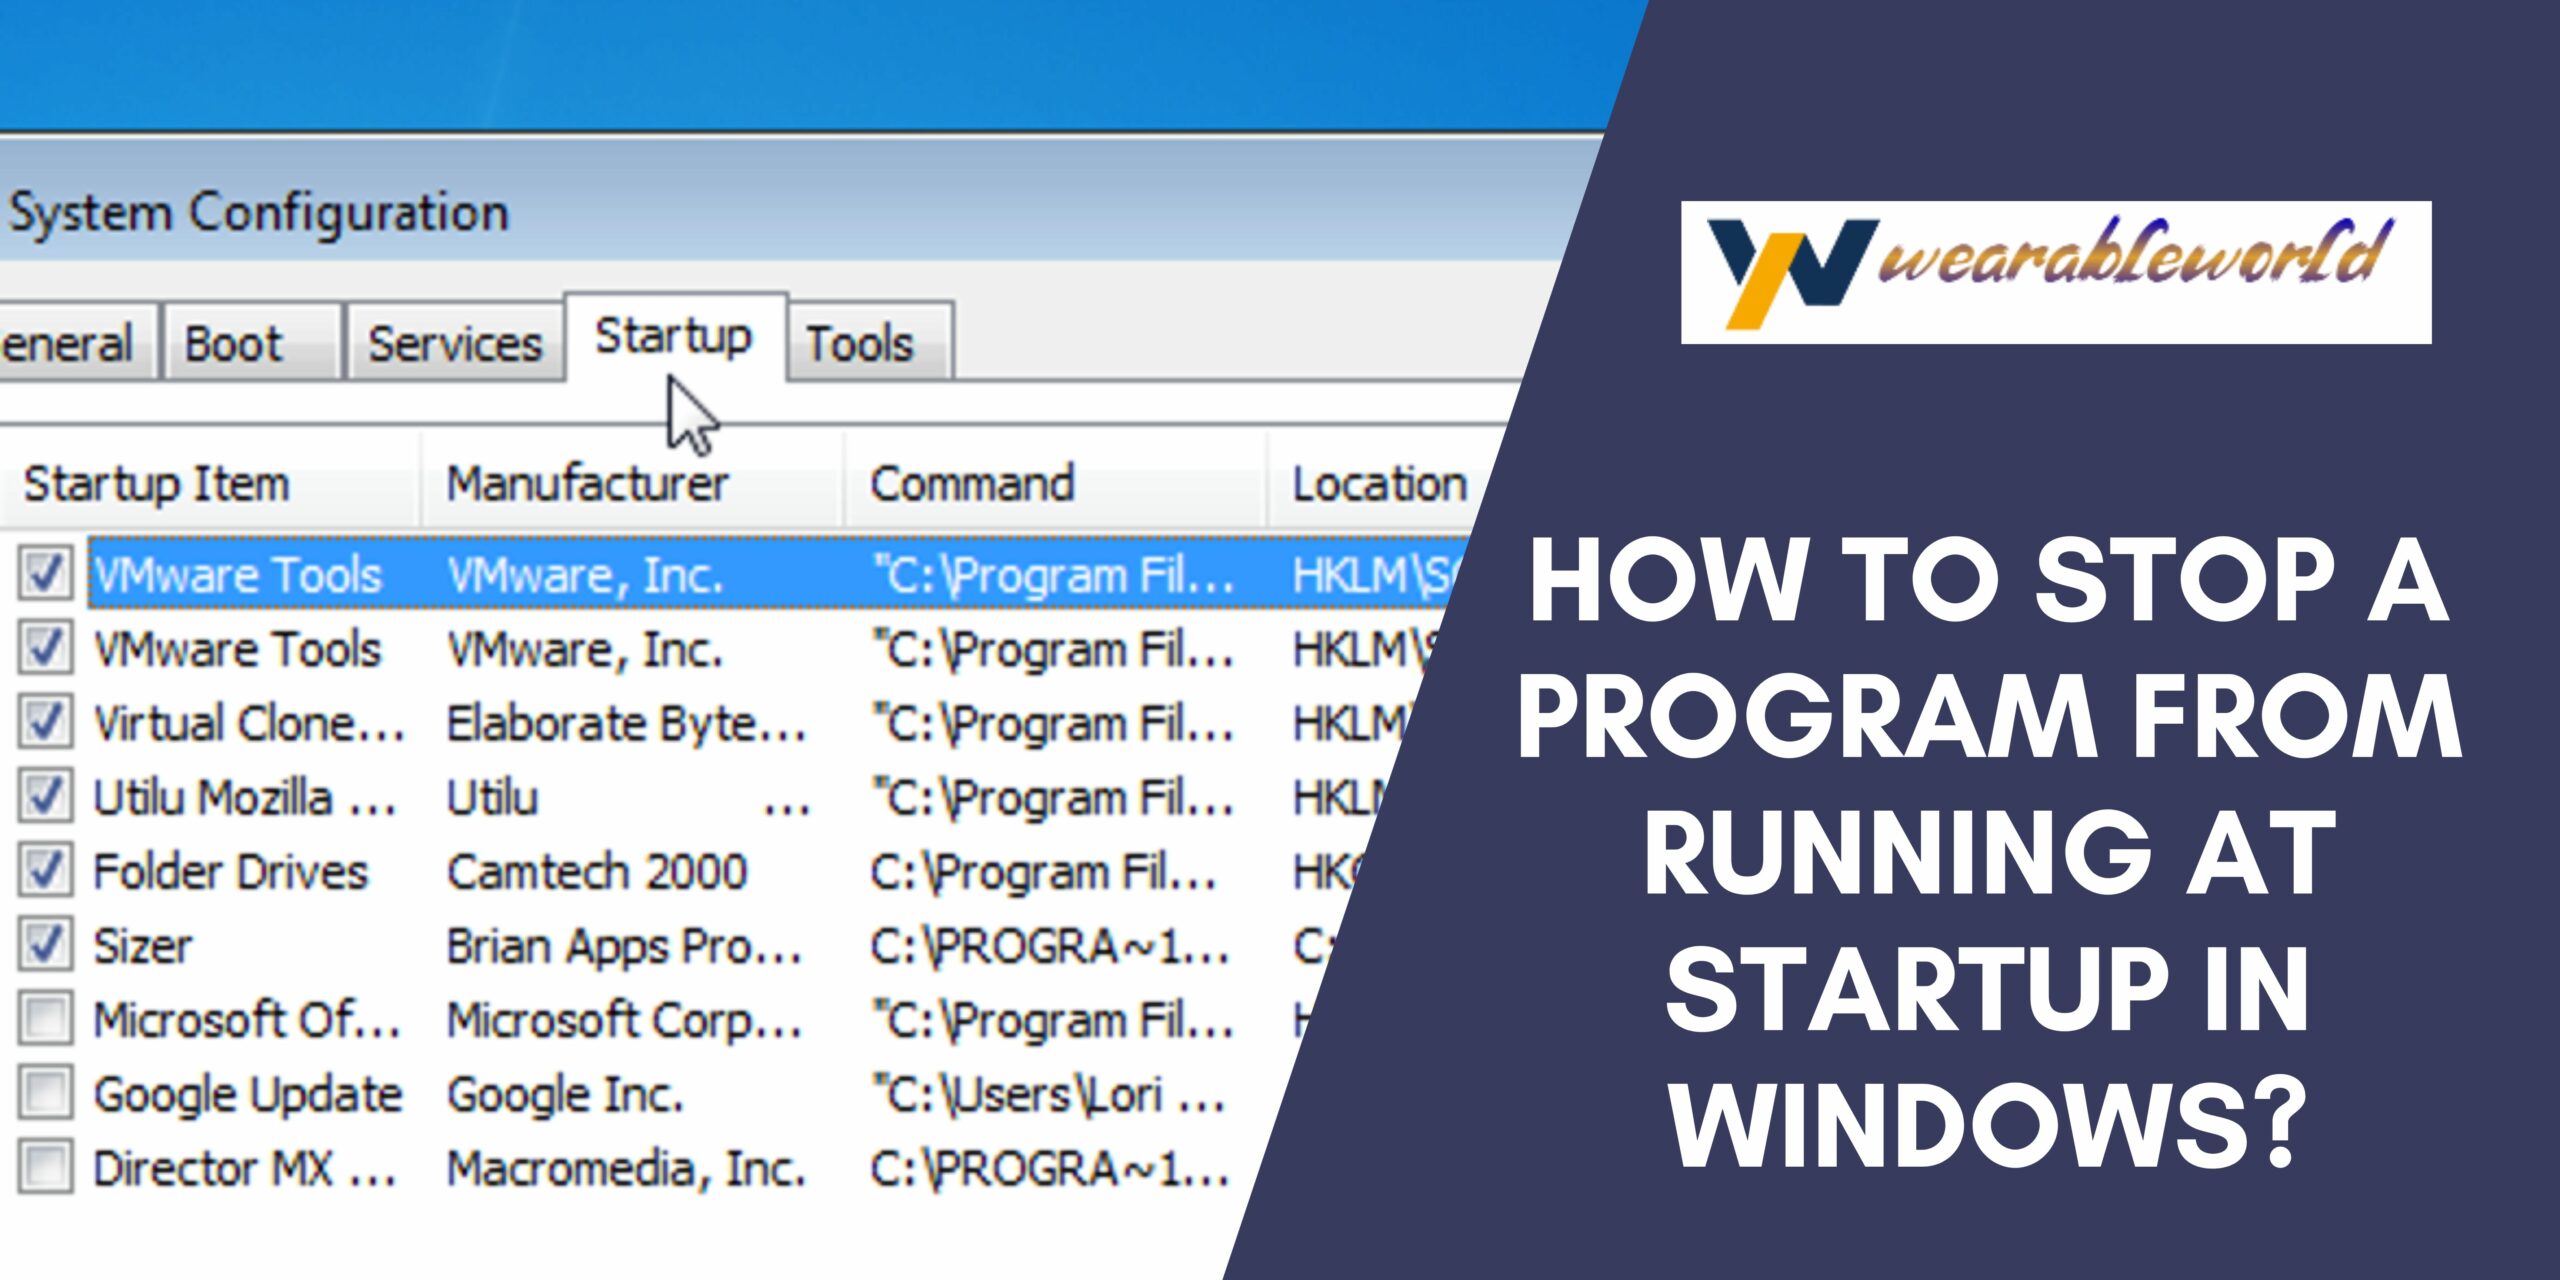 How To Stop A Program From Running At Startup In Windows